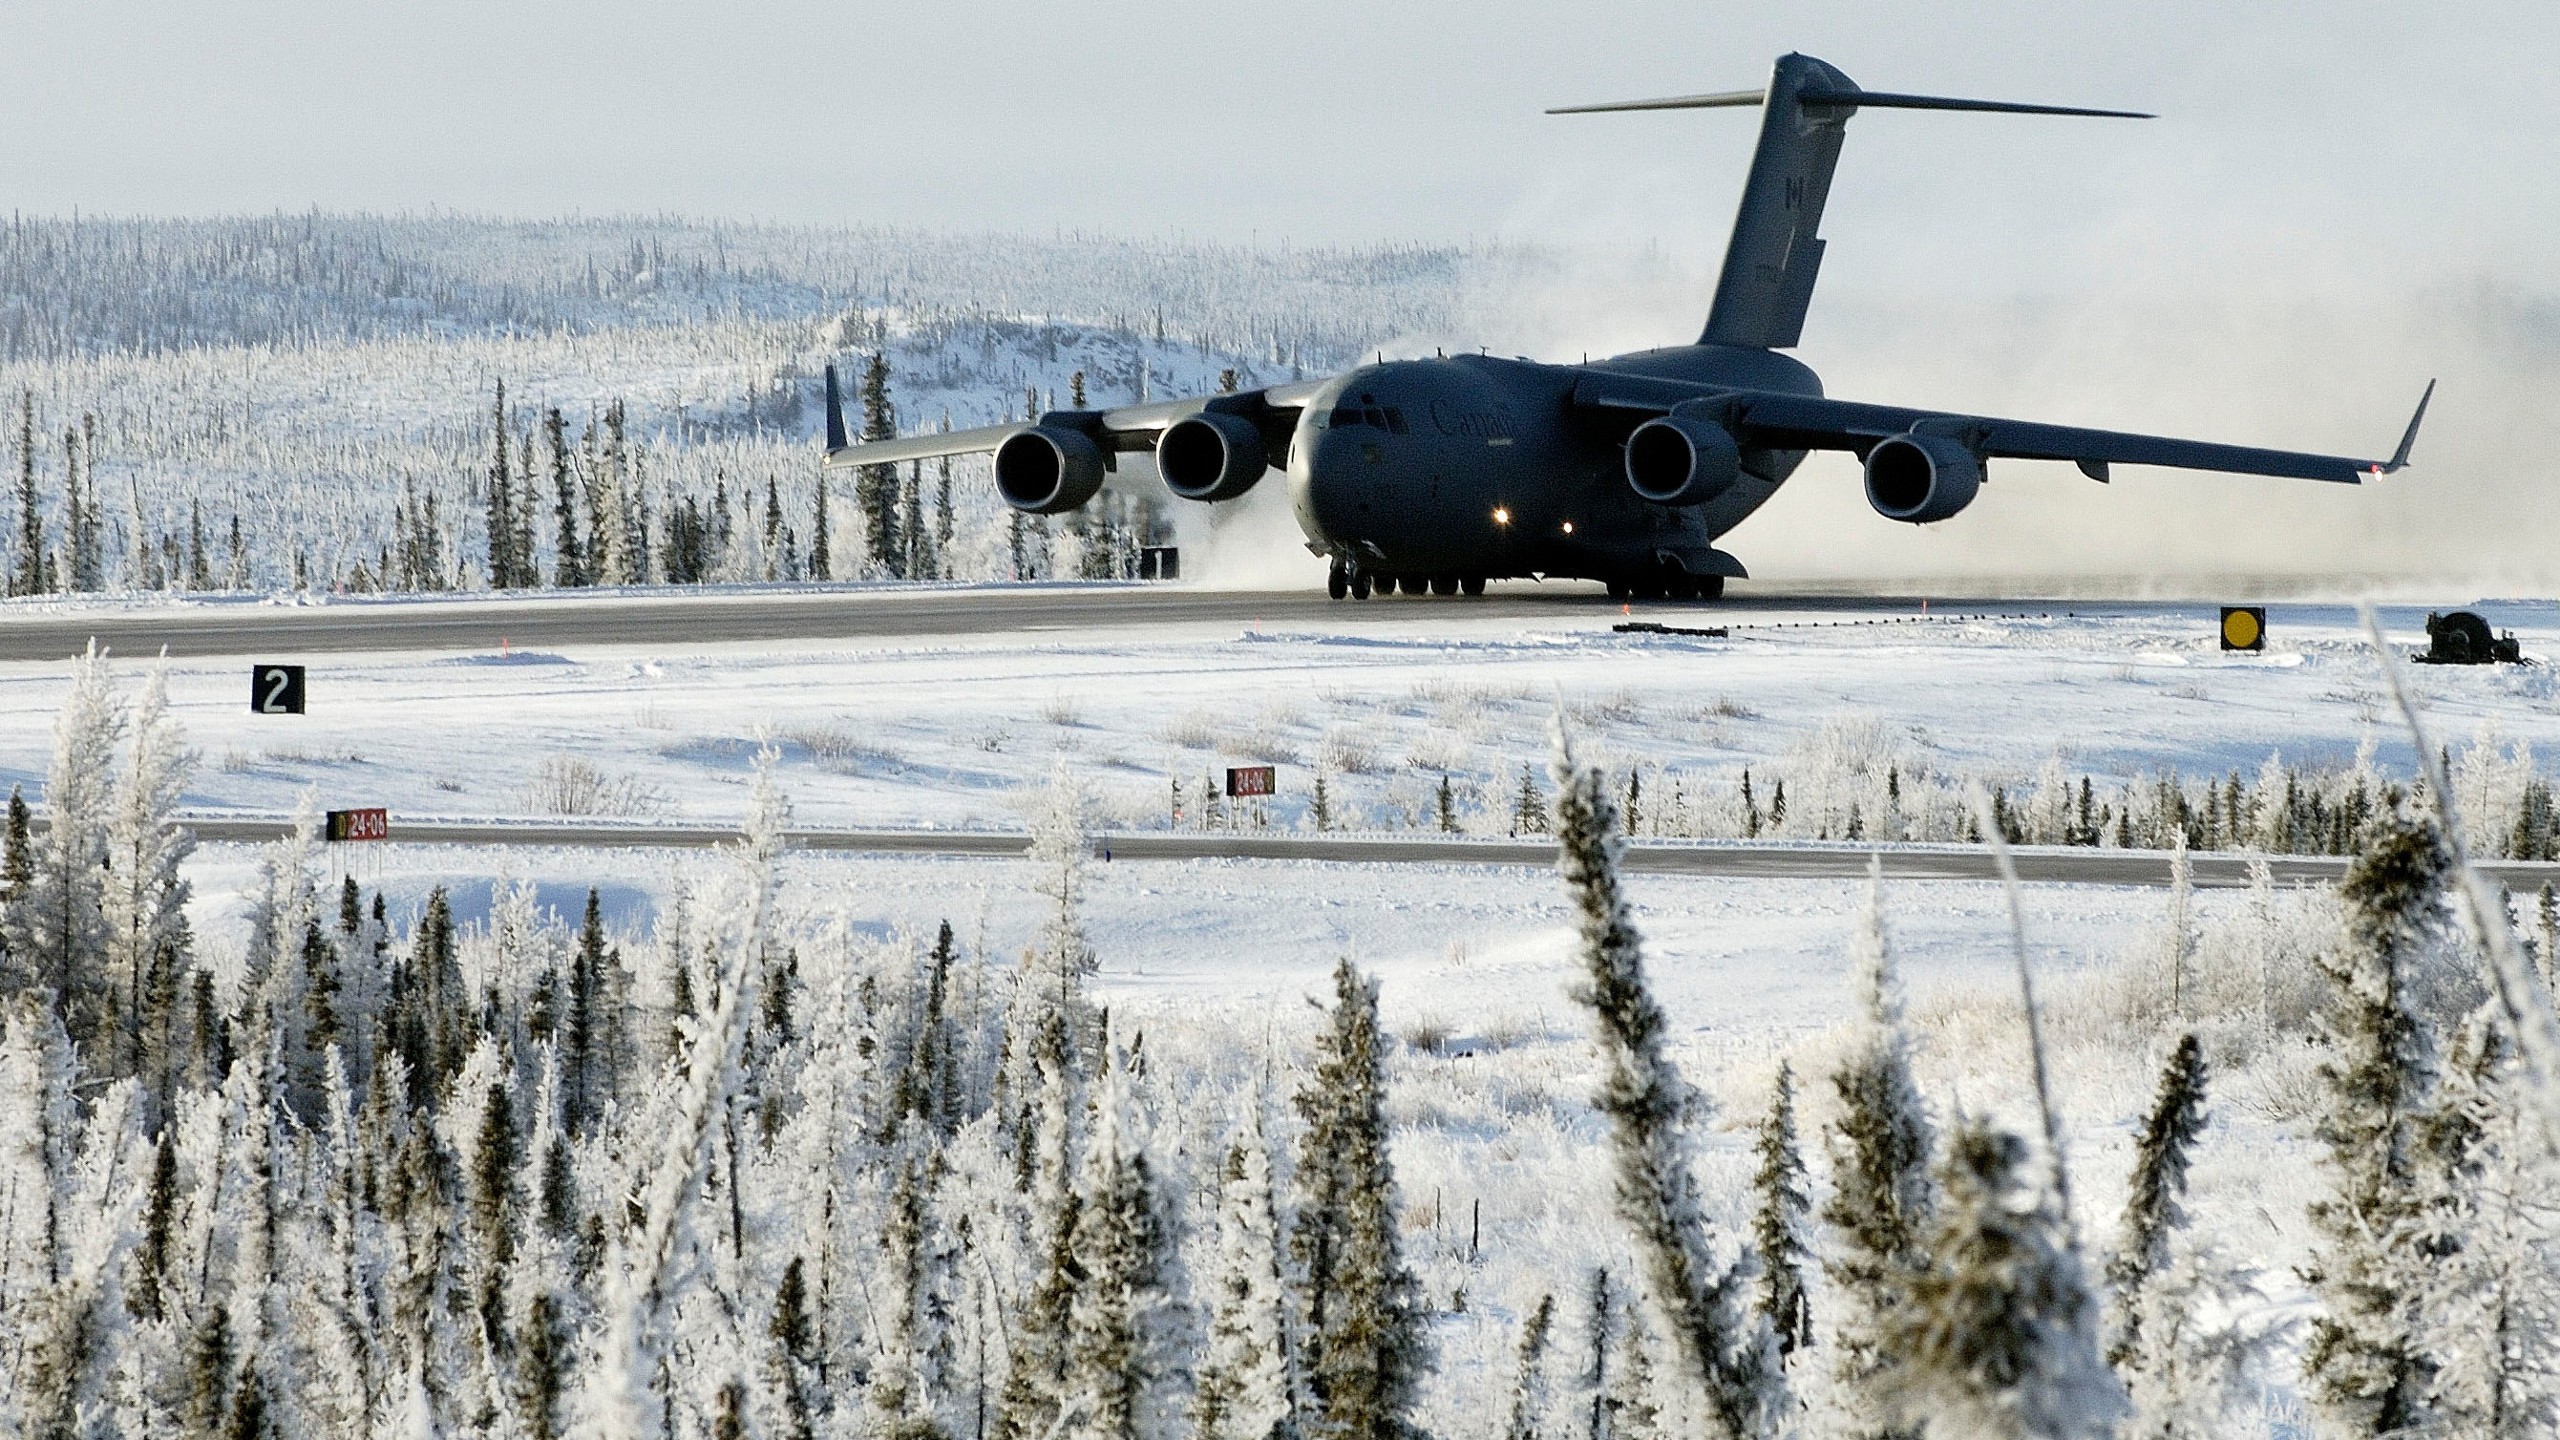 General 2560x1440 military aircraft military aircraft airplane Boeing C-17 Globemaster III Royal Canadian Air Force snow winter military vehicle vehicle cold outdoors Boeing American aircraft Canada frontal view snow covered trees smoke